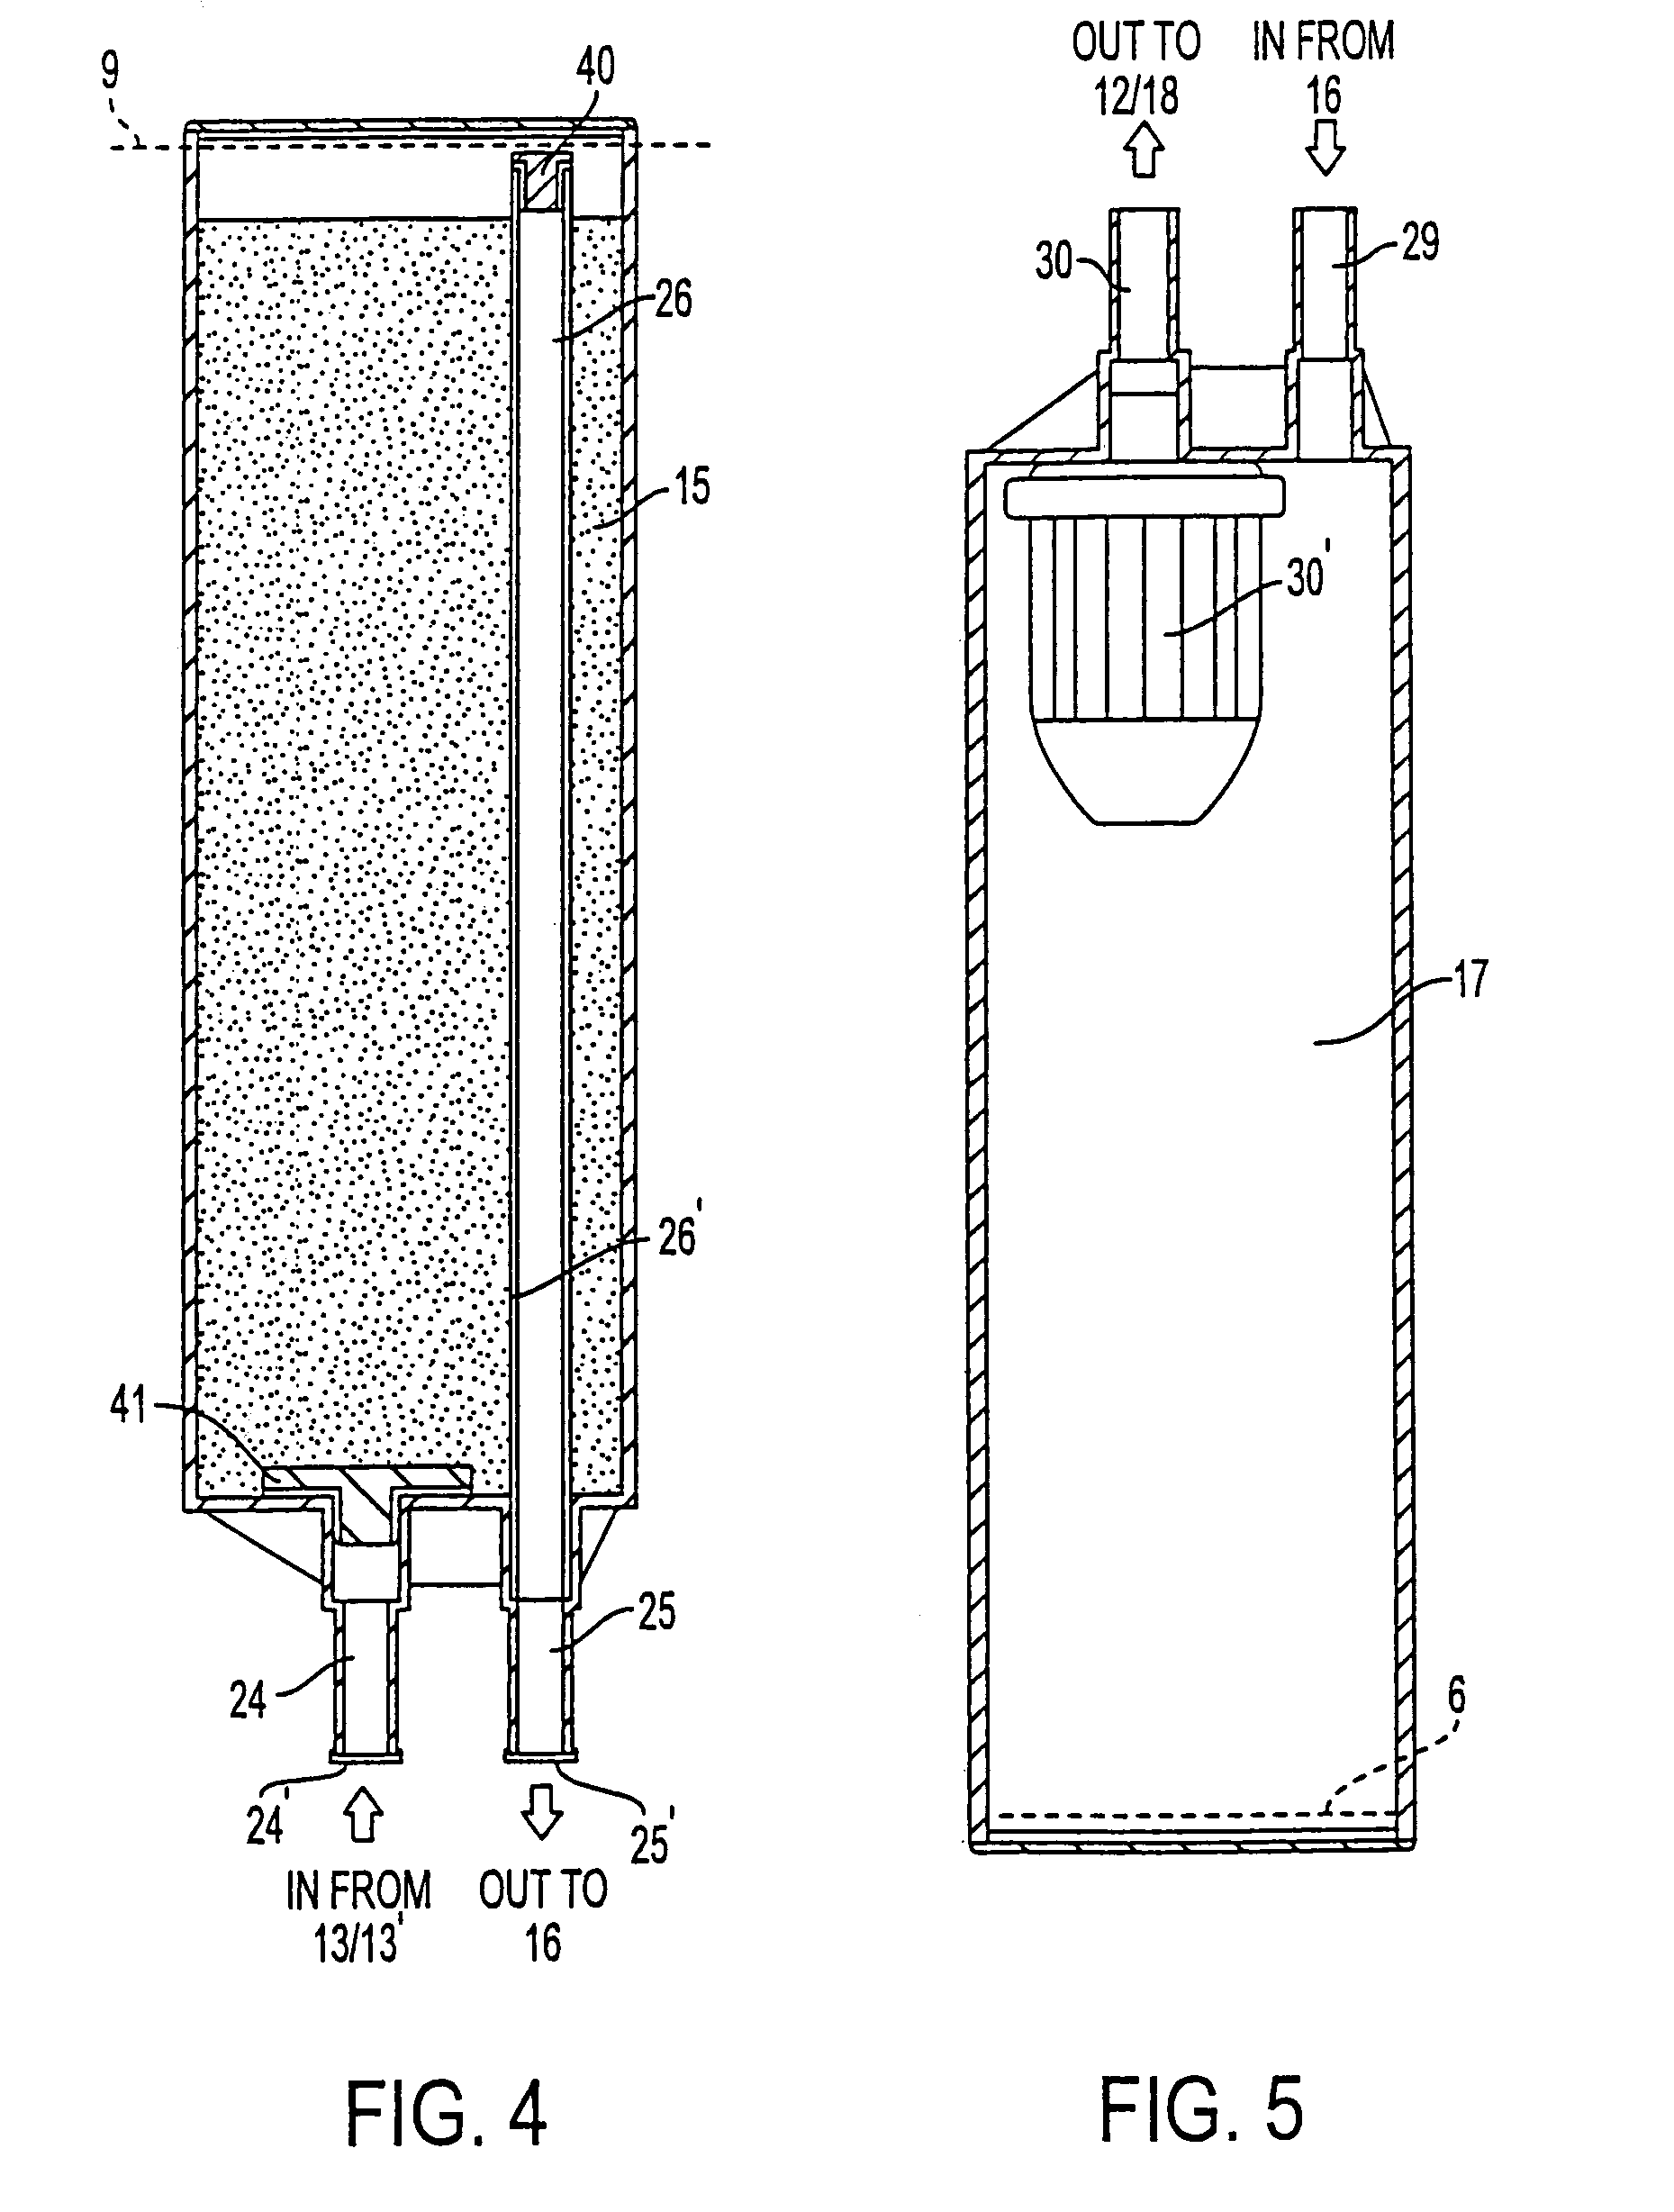 Dermabrasion apparatus and method having oval-shaped mixing bottle